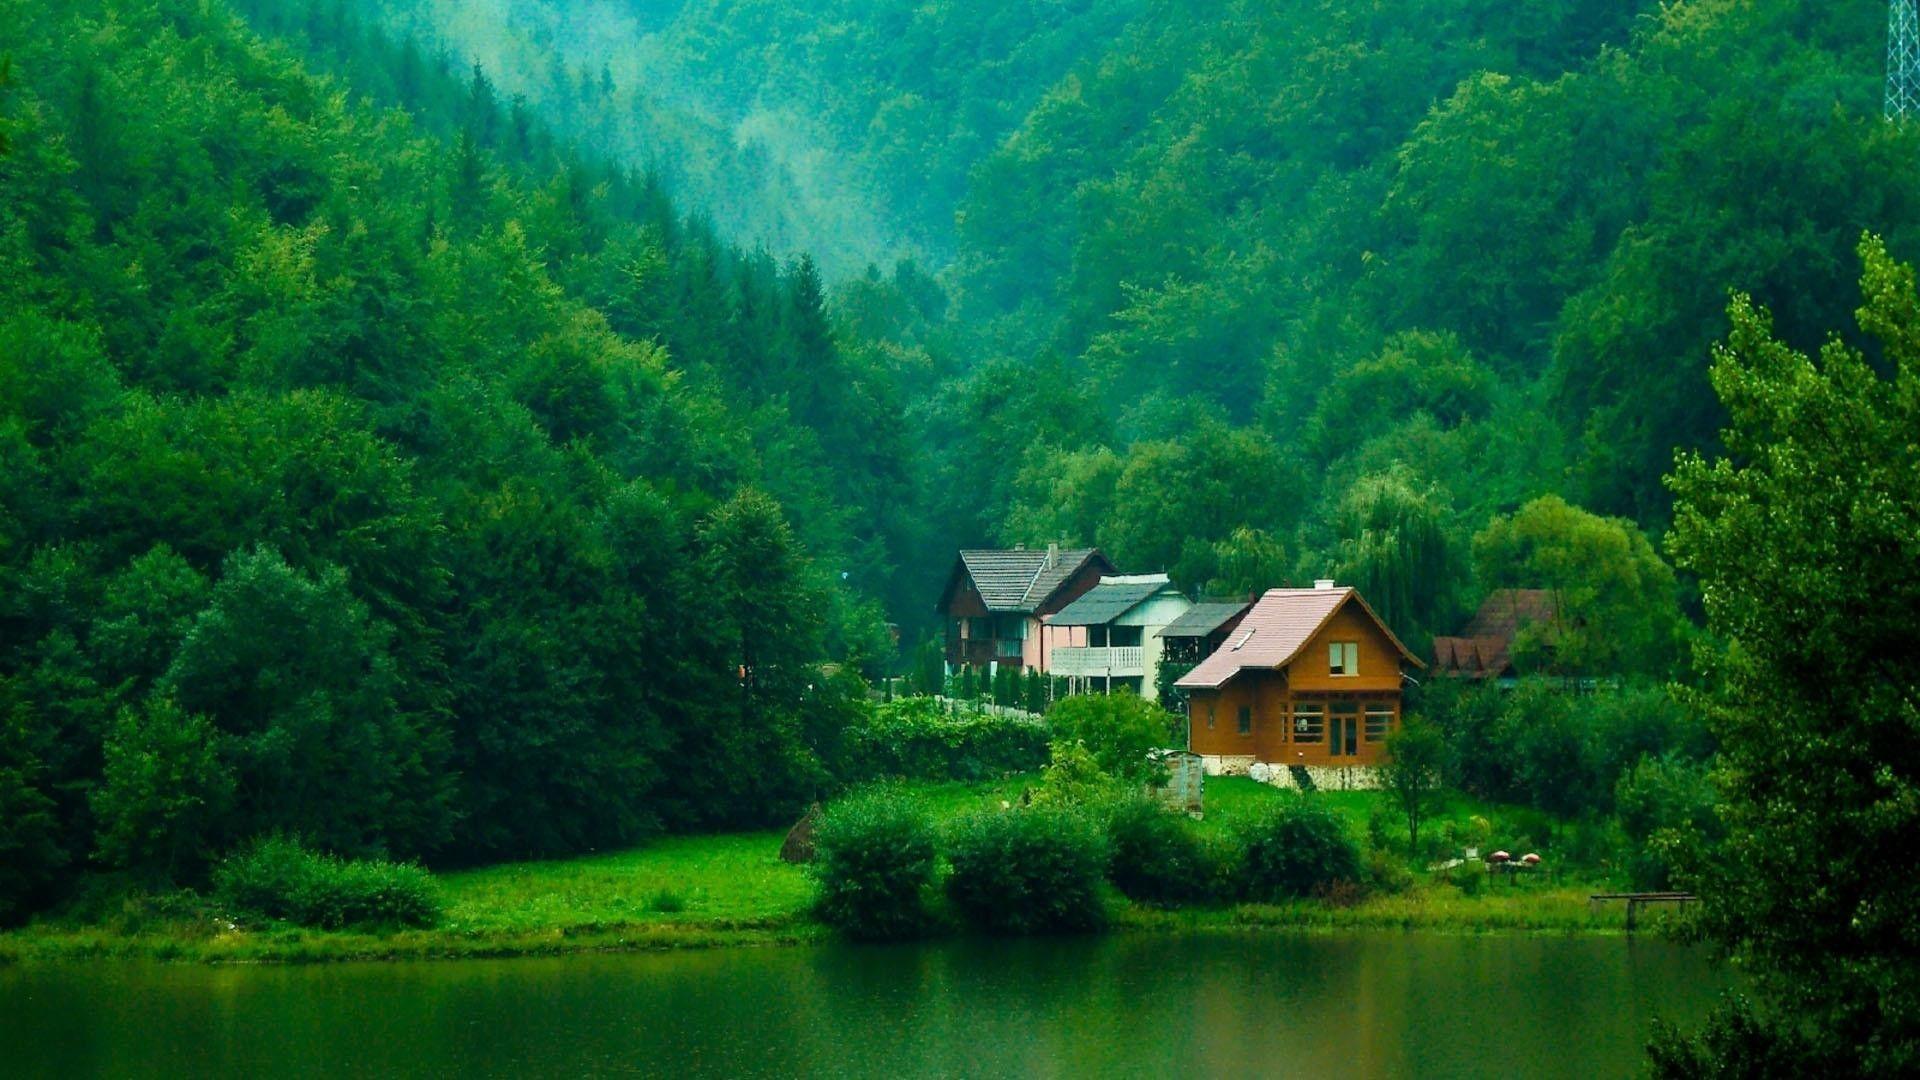 Lake houses in the forest wallpaper. PC